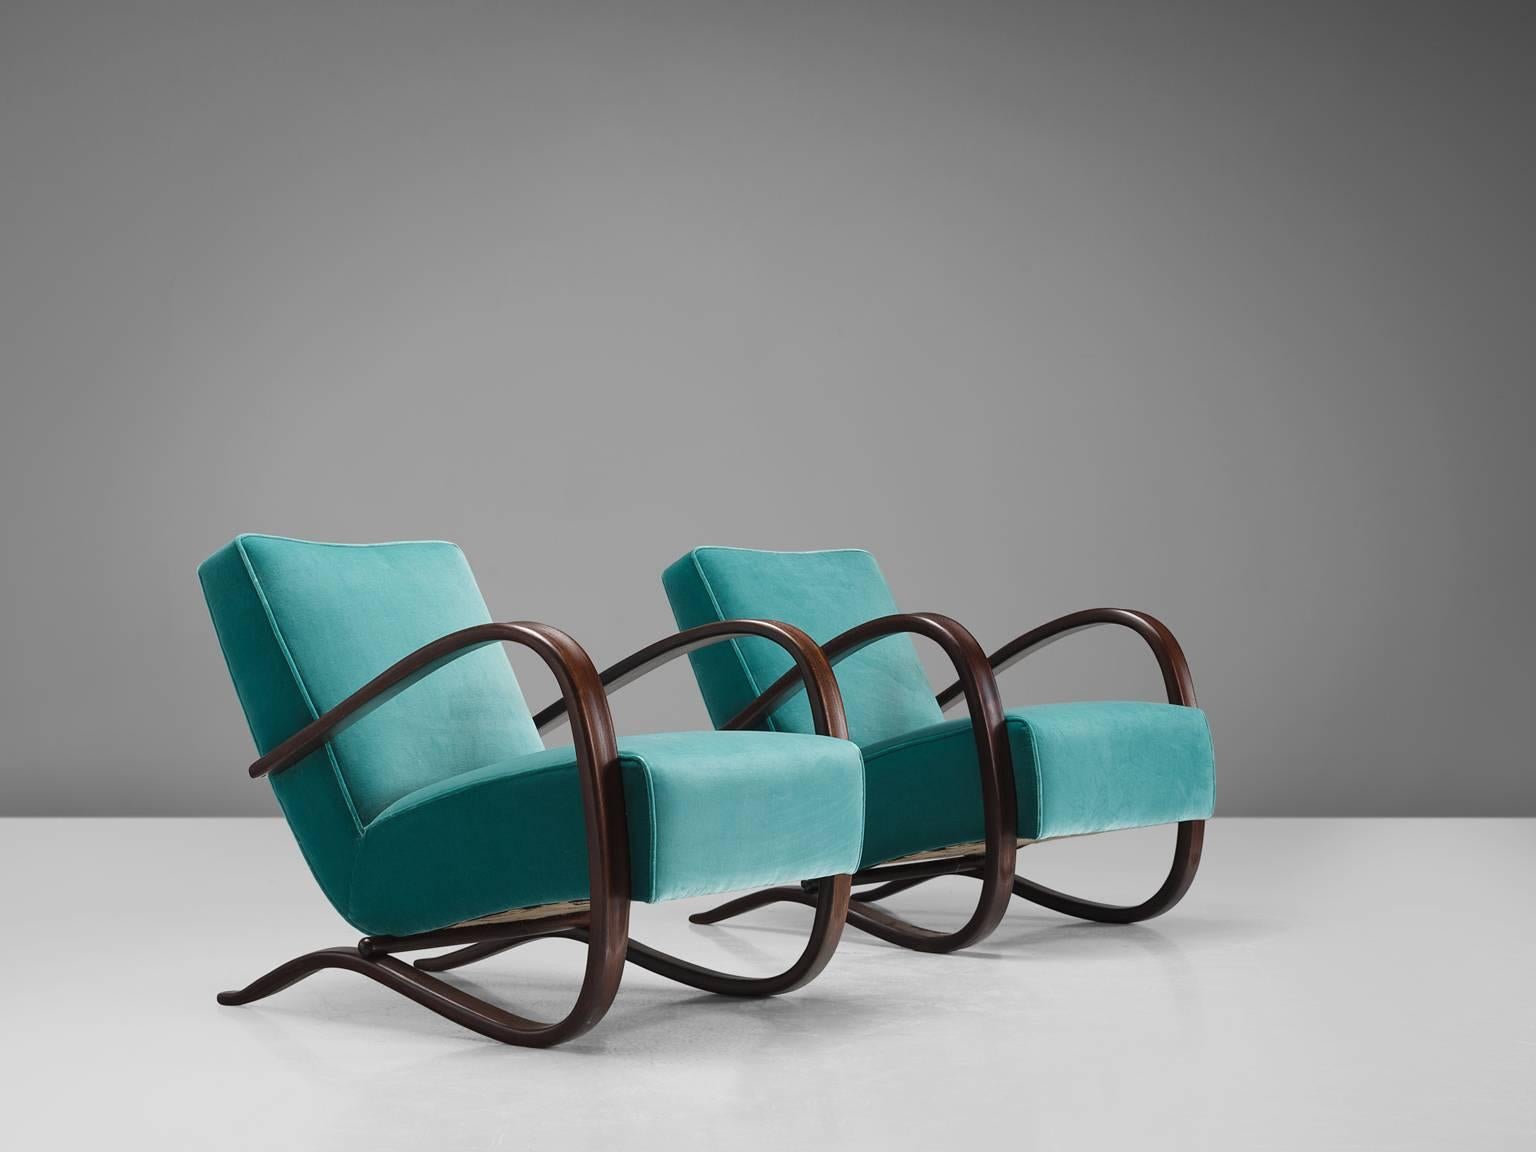 Jindrich Halabala, lounge chairs, green to turquoise velvet and beech, Czech Republic, 1930s. 

This extraordinary pair of Halabala chairs are upholstered with turquoise Kvadrat fabric upholstery. The main feature of this chair by Hindrich Halabala